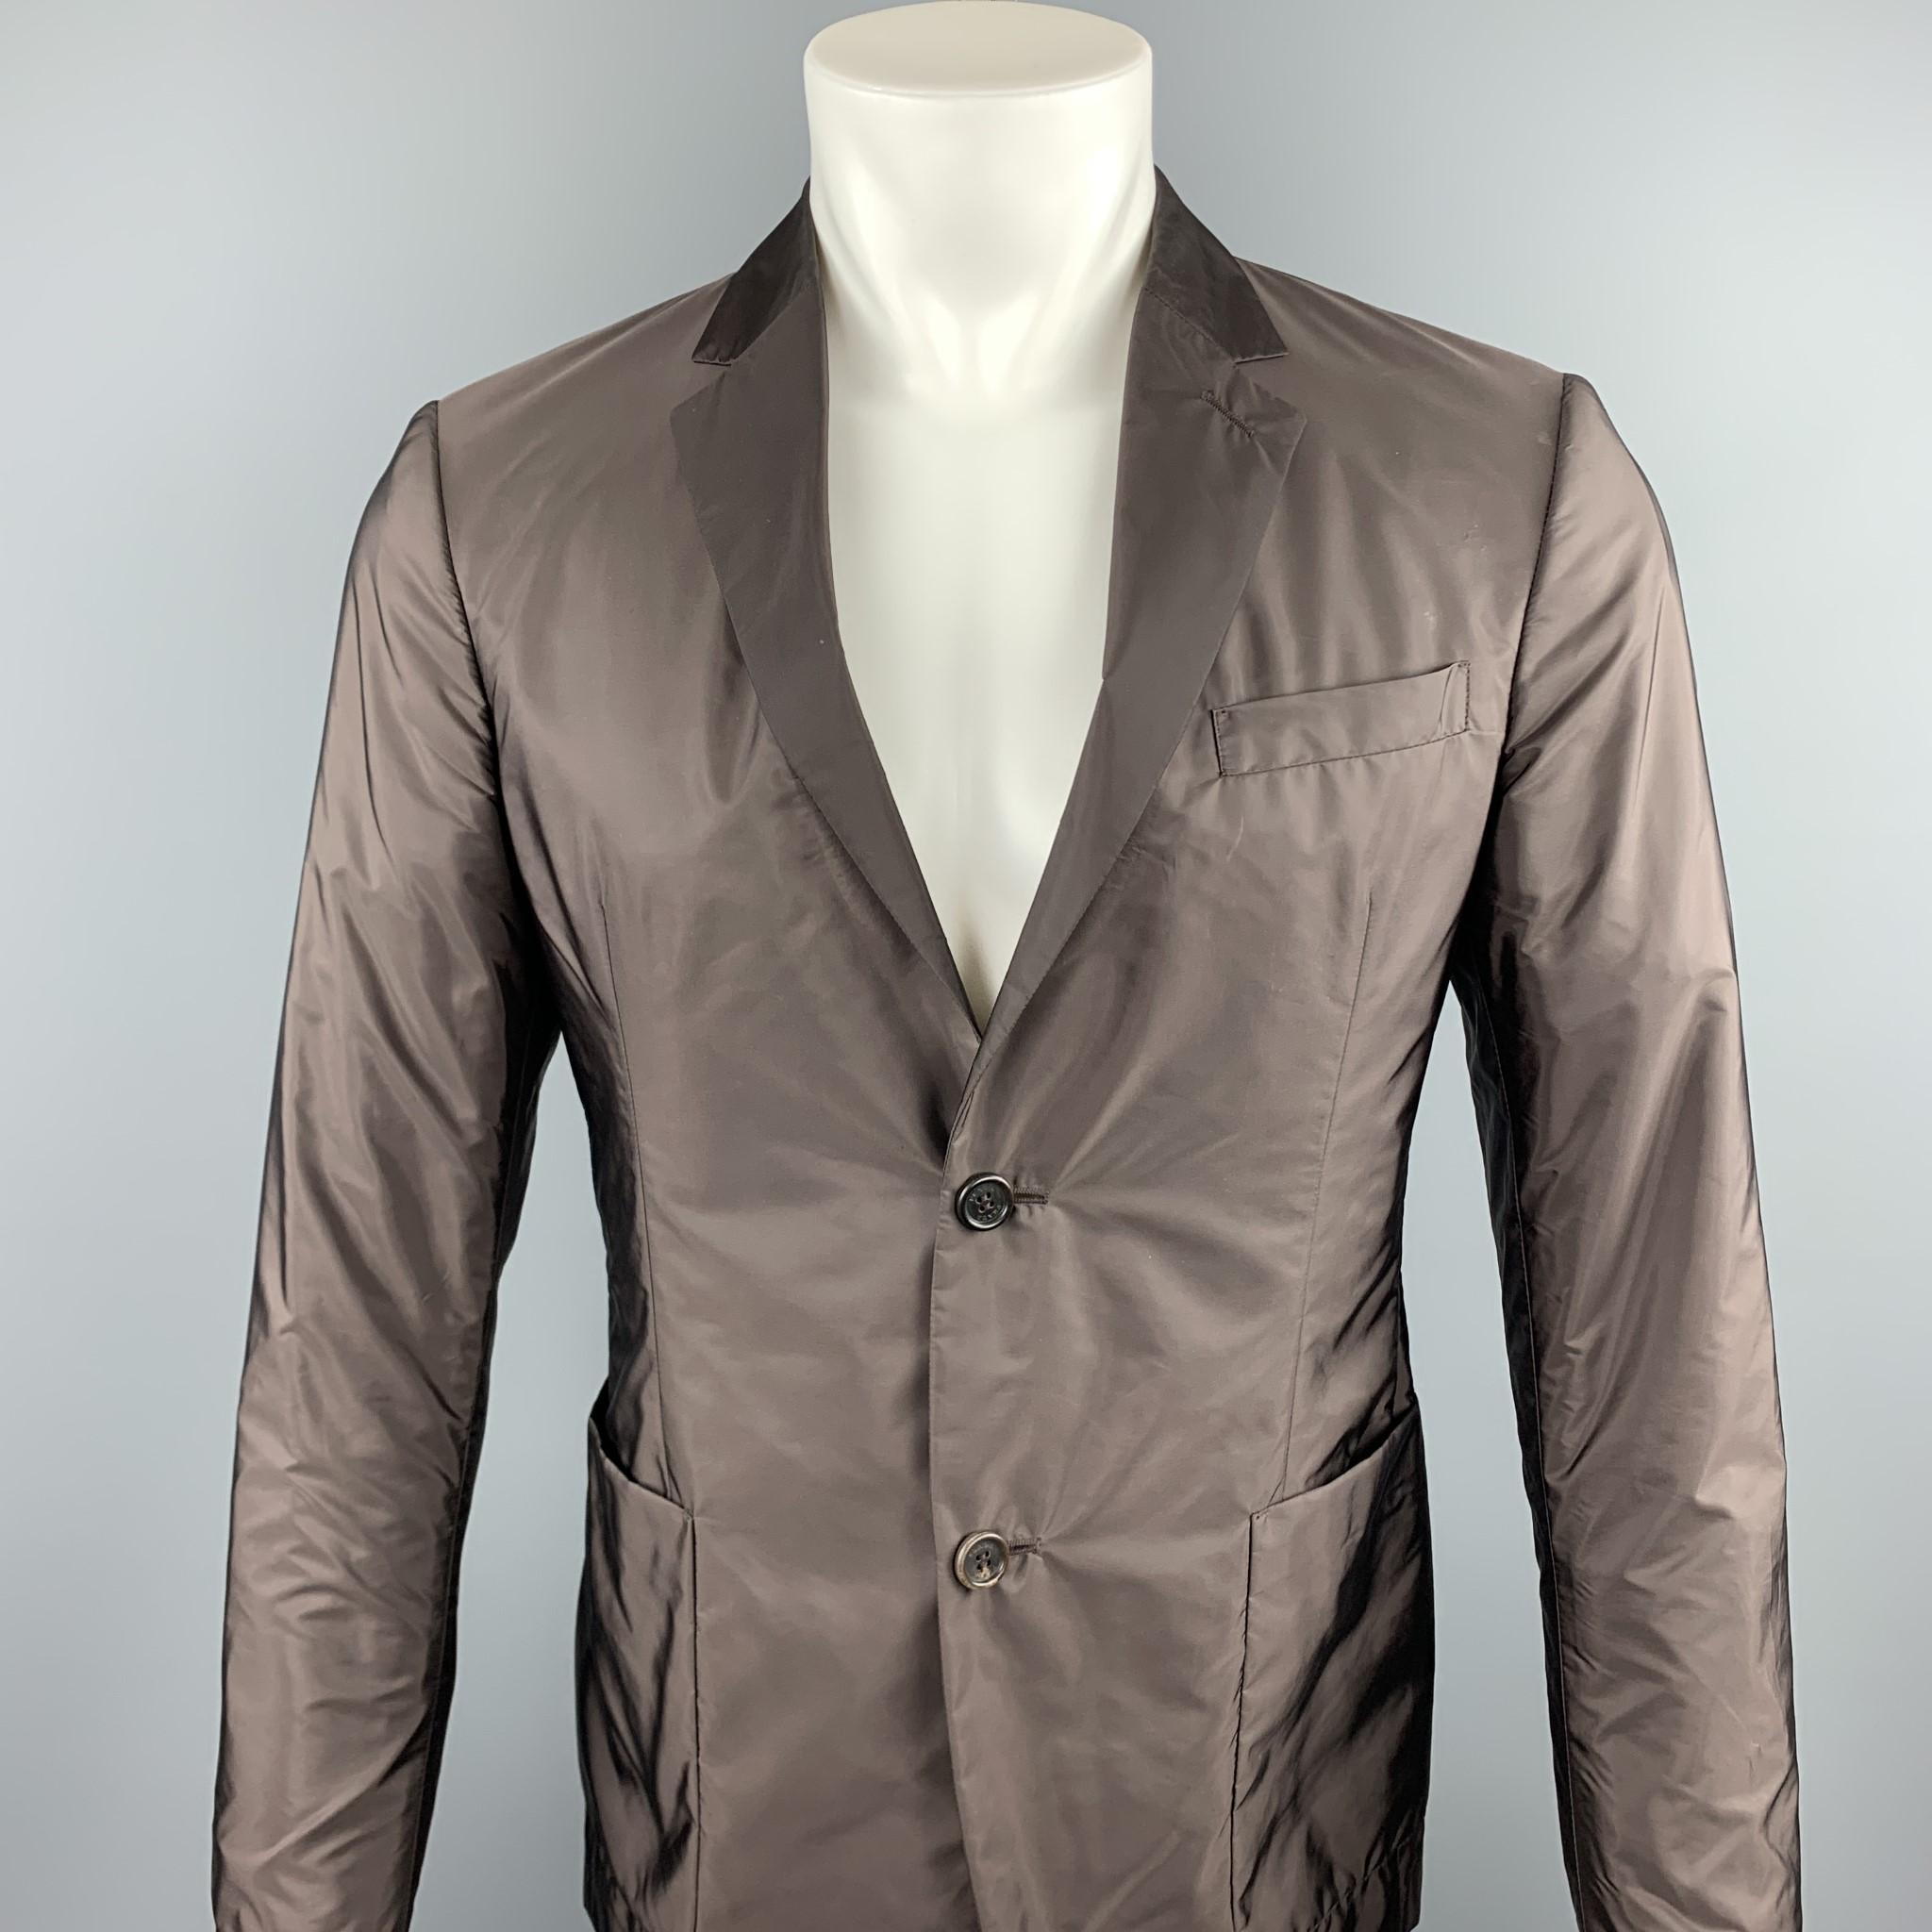 PRADA sport coat comes in a brown polyester featuring a notch lapel, patch pockets, and a two button closure. 

Excellent Pre-Owned Condition.
Marked: TG 48

Measurements:

Shoulder: 16.5 in. 
Chest: 38 in. 
Sleeve: 26 in. 
Length: 28 in. 